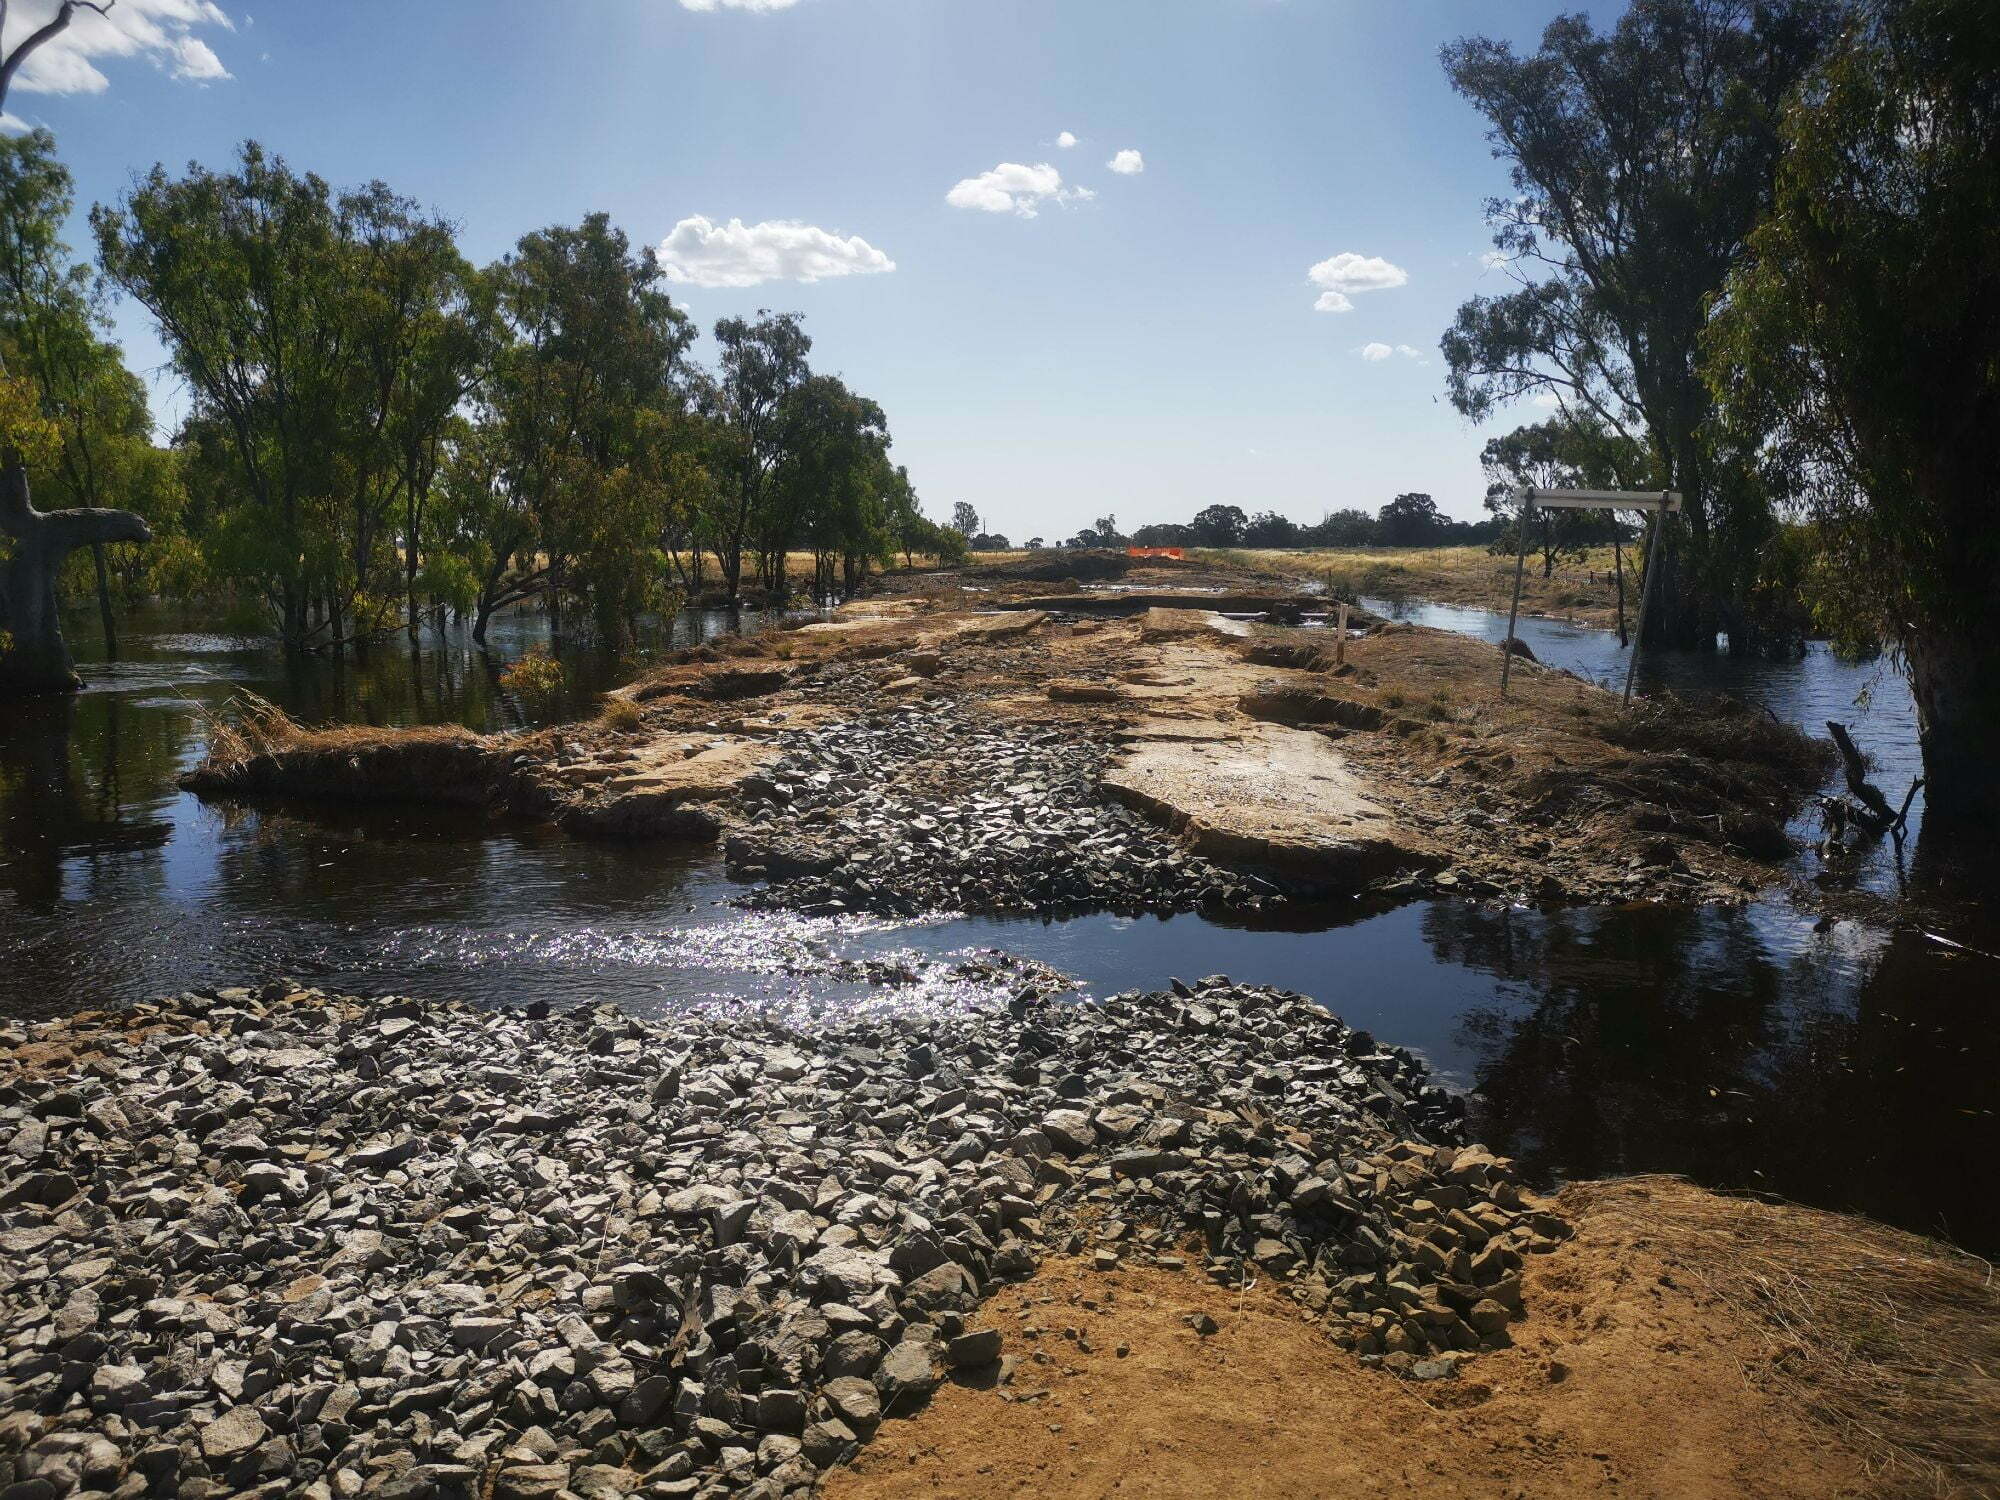 The flood caused serious damage to the Brassie Road crossing at Cooey Hoo Creek (since been repaired), so the field team had to take a long detour around to get to their sites. Photo credit, John Trethewie, CSU.